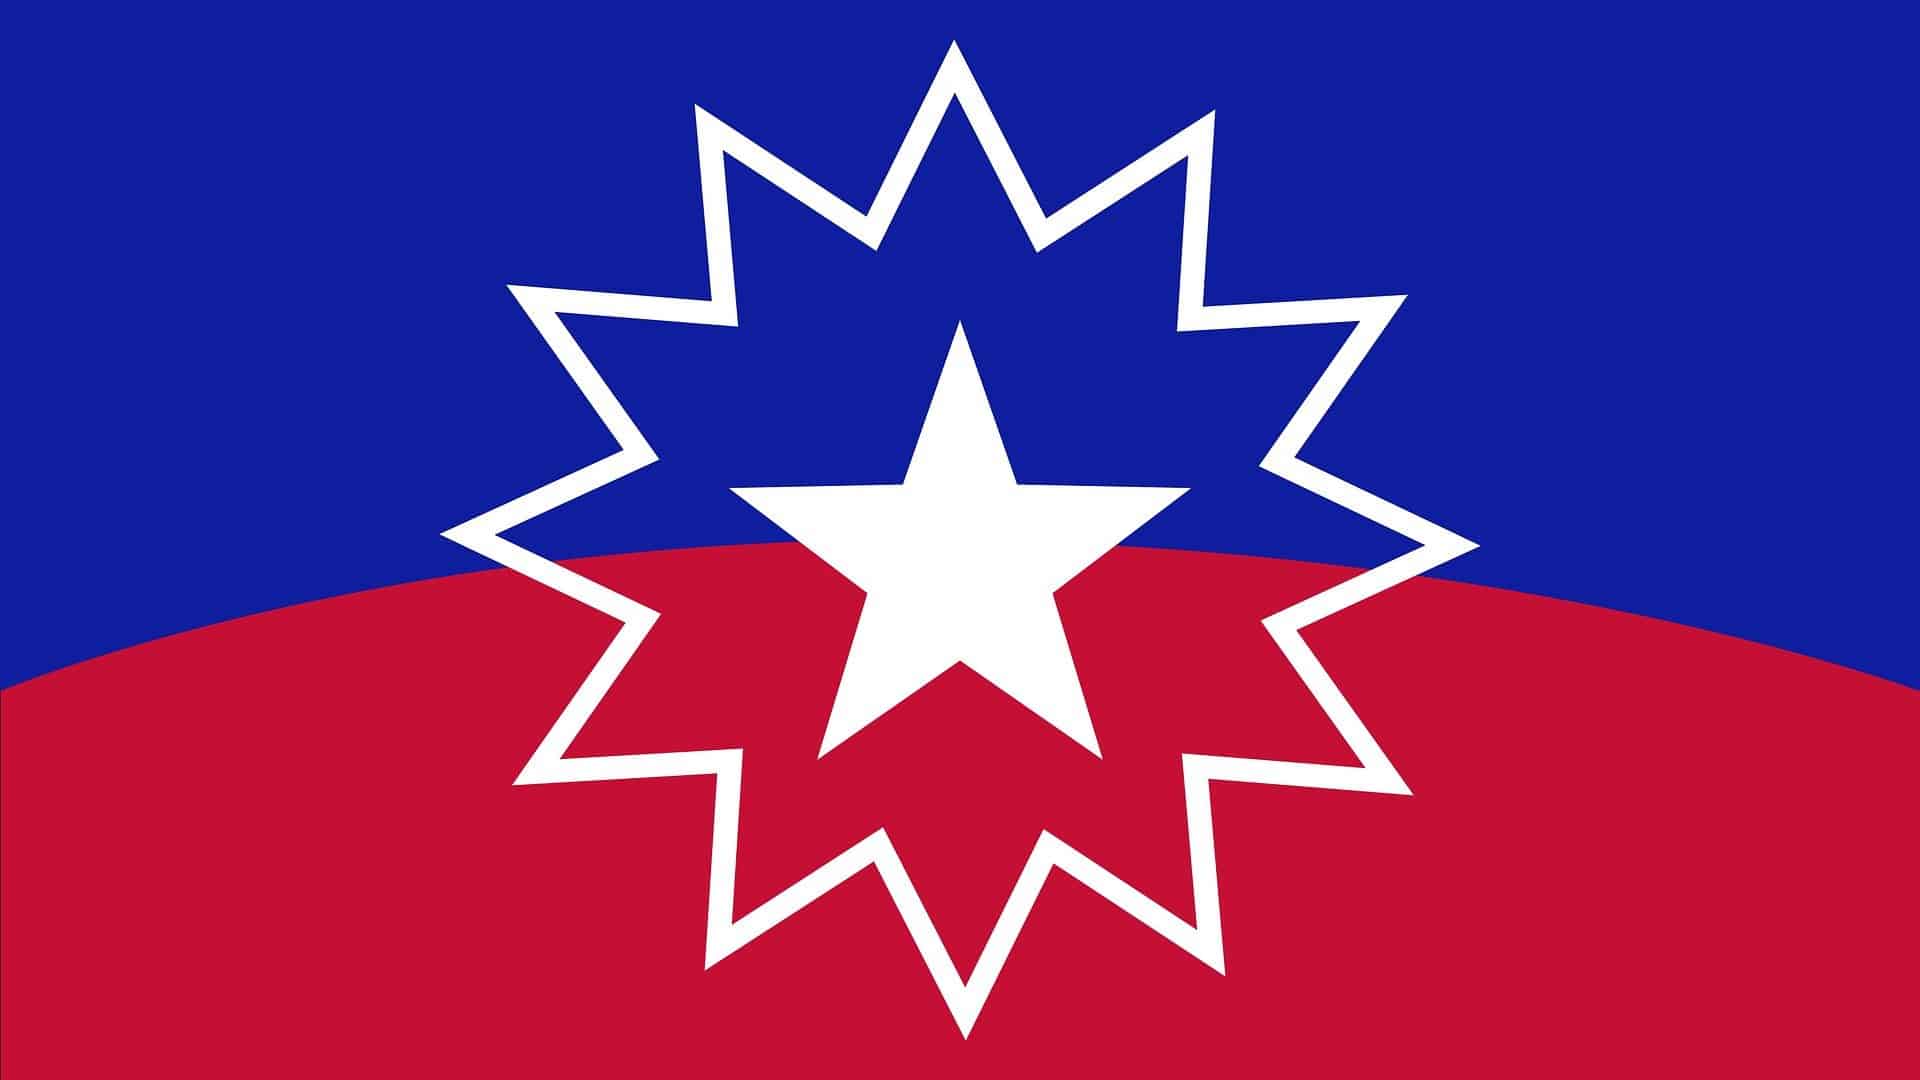 The rectangular Juneteenth flag. It is royal blue and red with a white star in the center surrounded by a a 12 pointed star outline